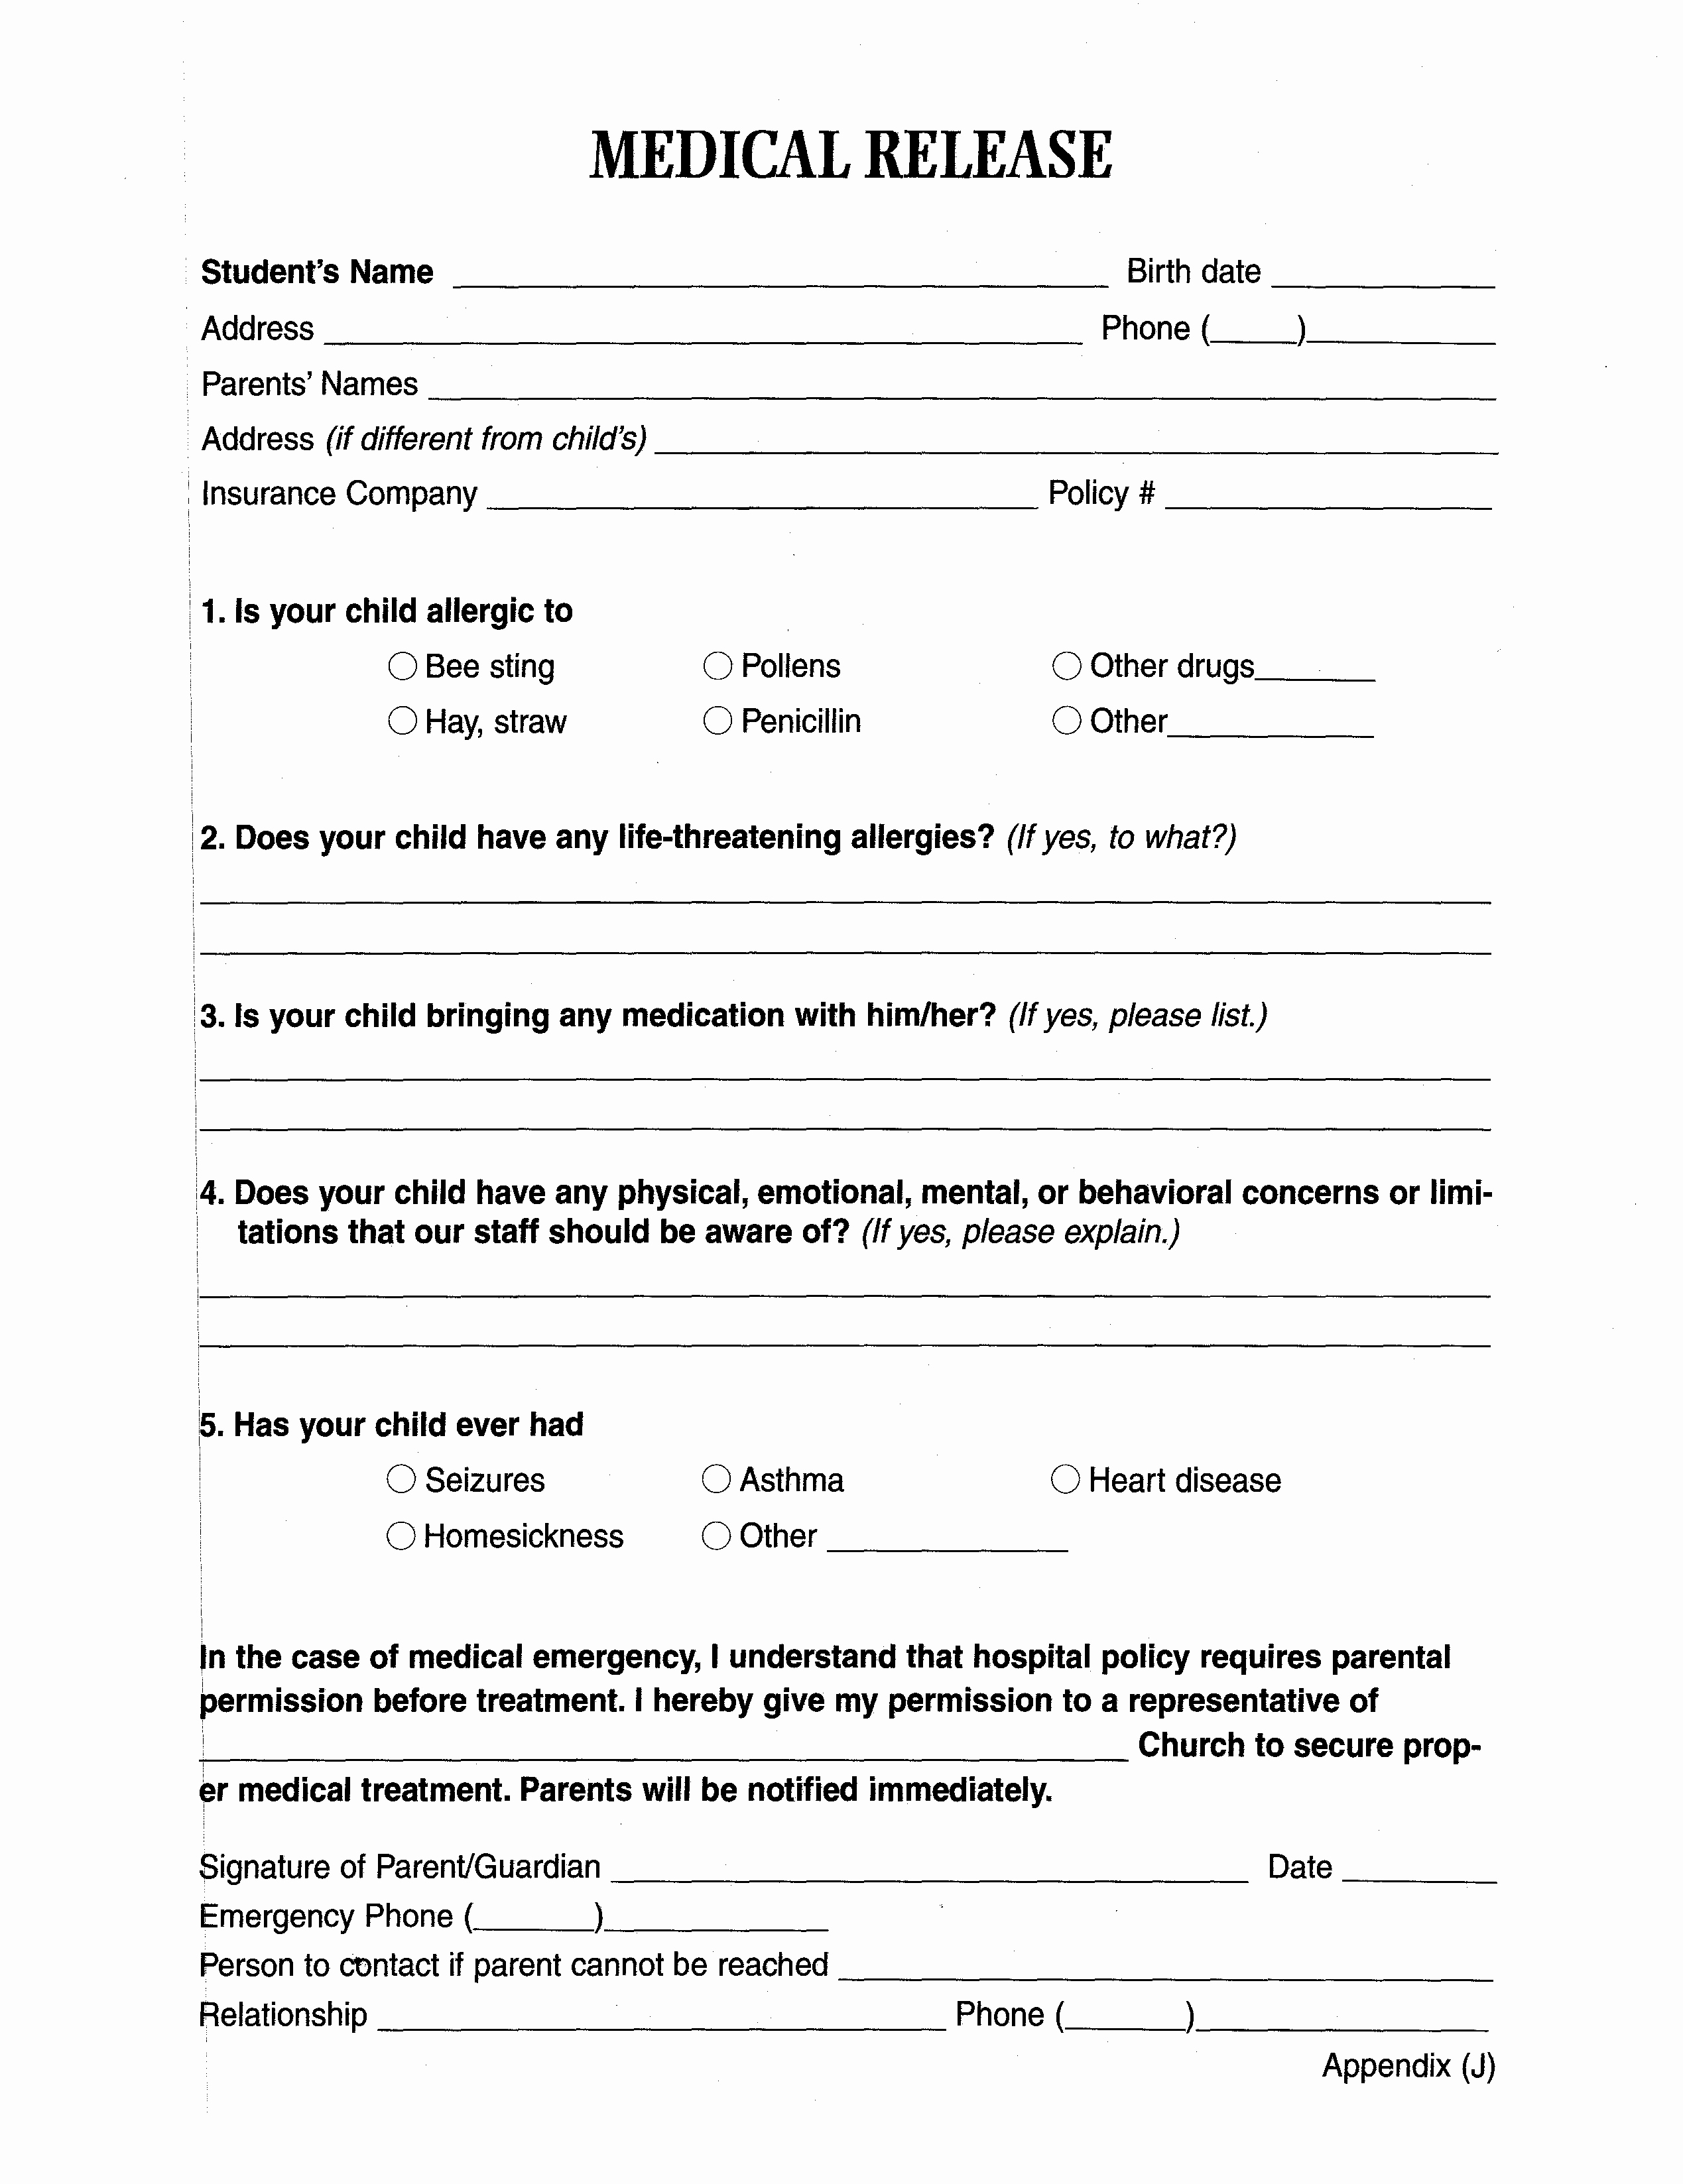 Free Medical Release form Inspirational Medical Release form for Adults – Templates Free Printable